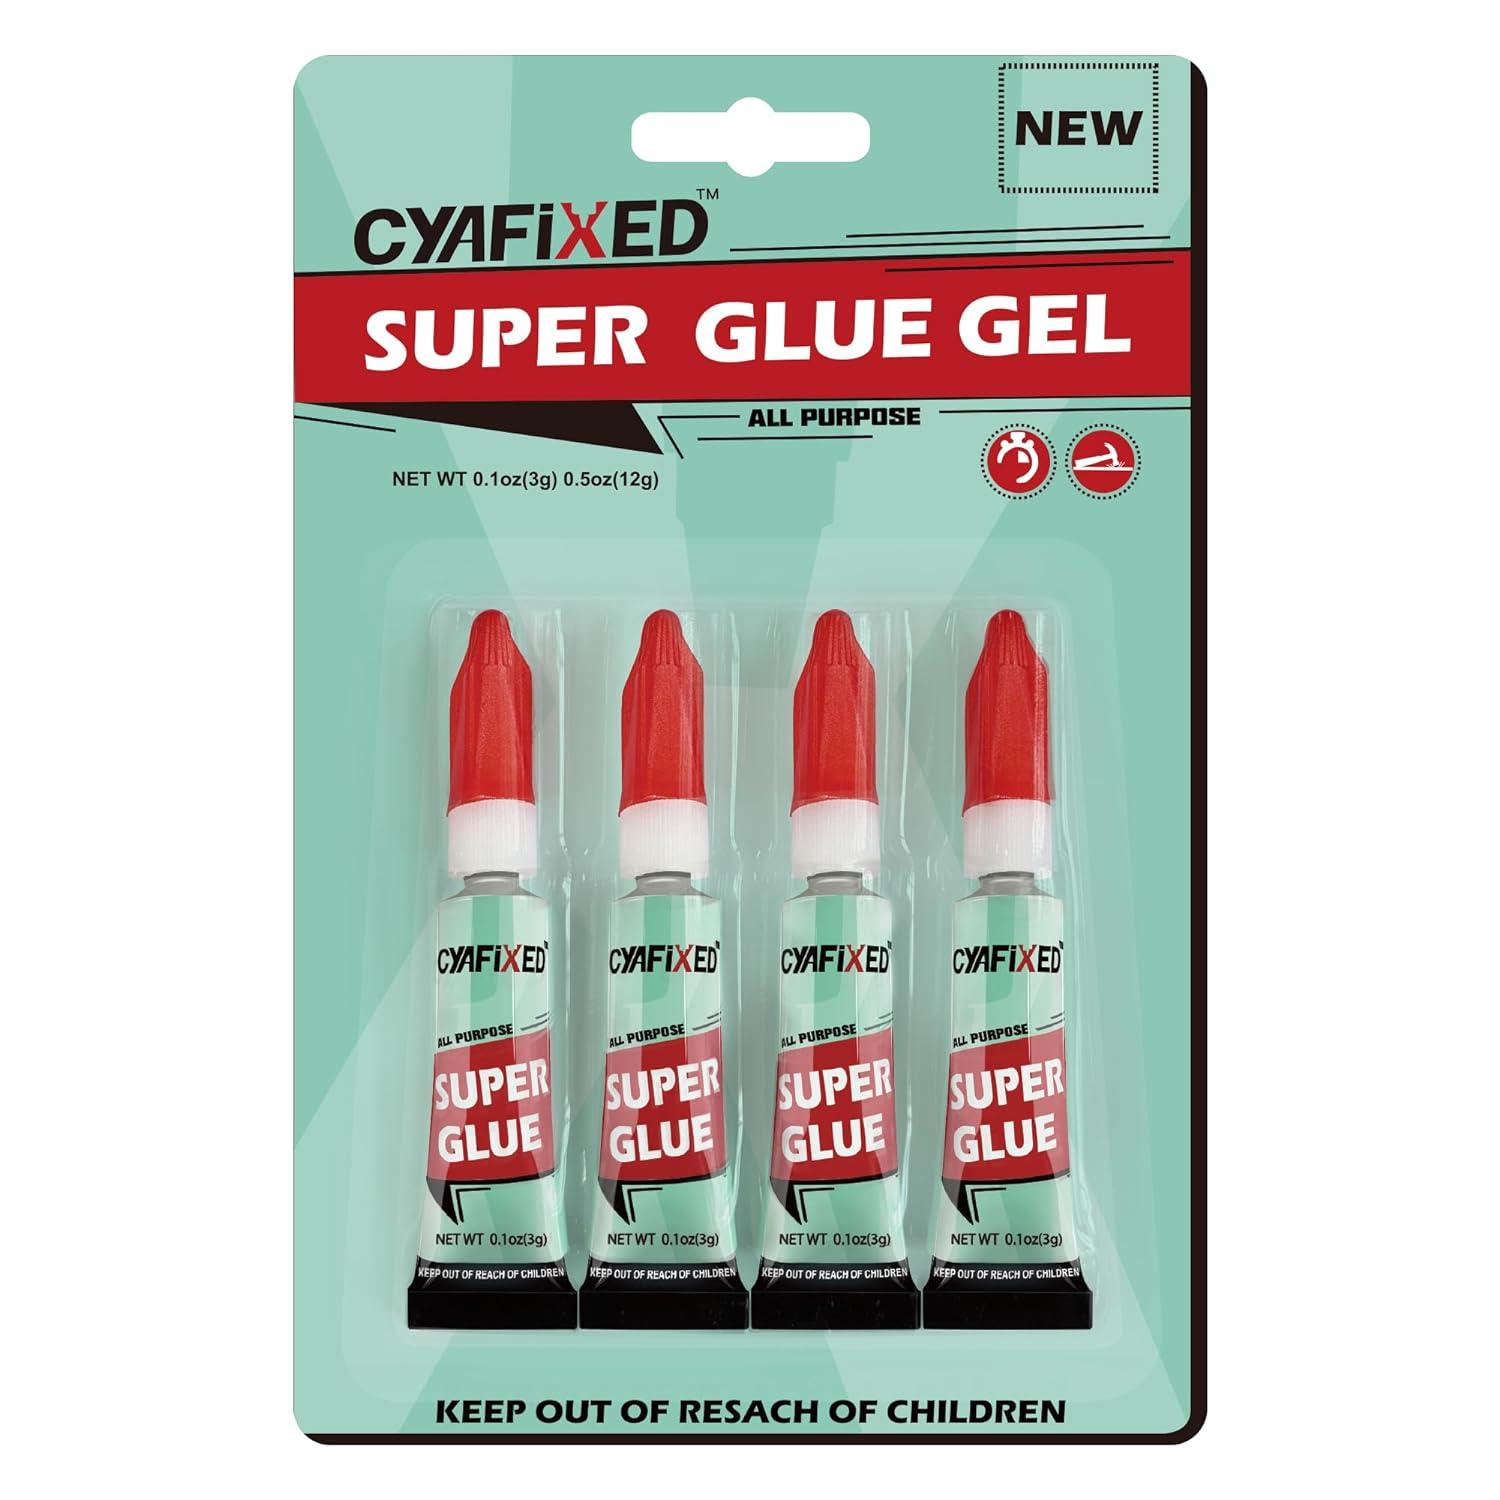 CYAFIXED Super Glue Gel Single Use Minis Four 3 Gram Tubes General Purpose CA Glue Industrial Grade Instant Adhesive For Ceramic Wood Metal Glass Plastic And Rubber Clear Pack Of 1